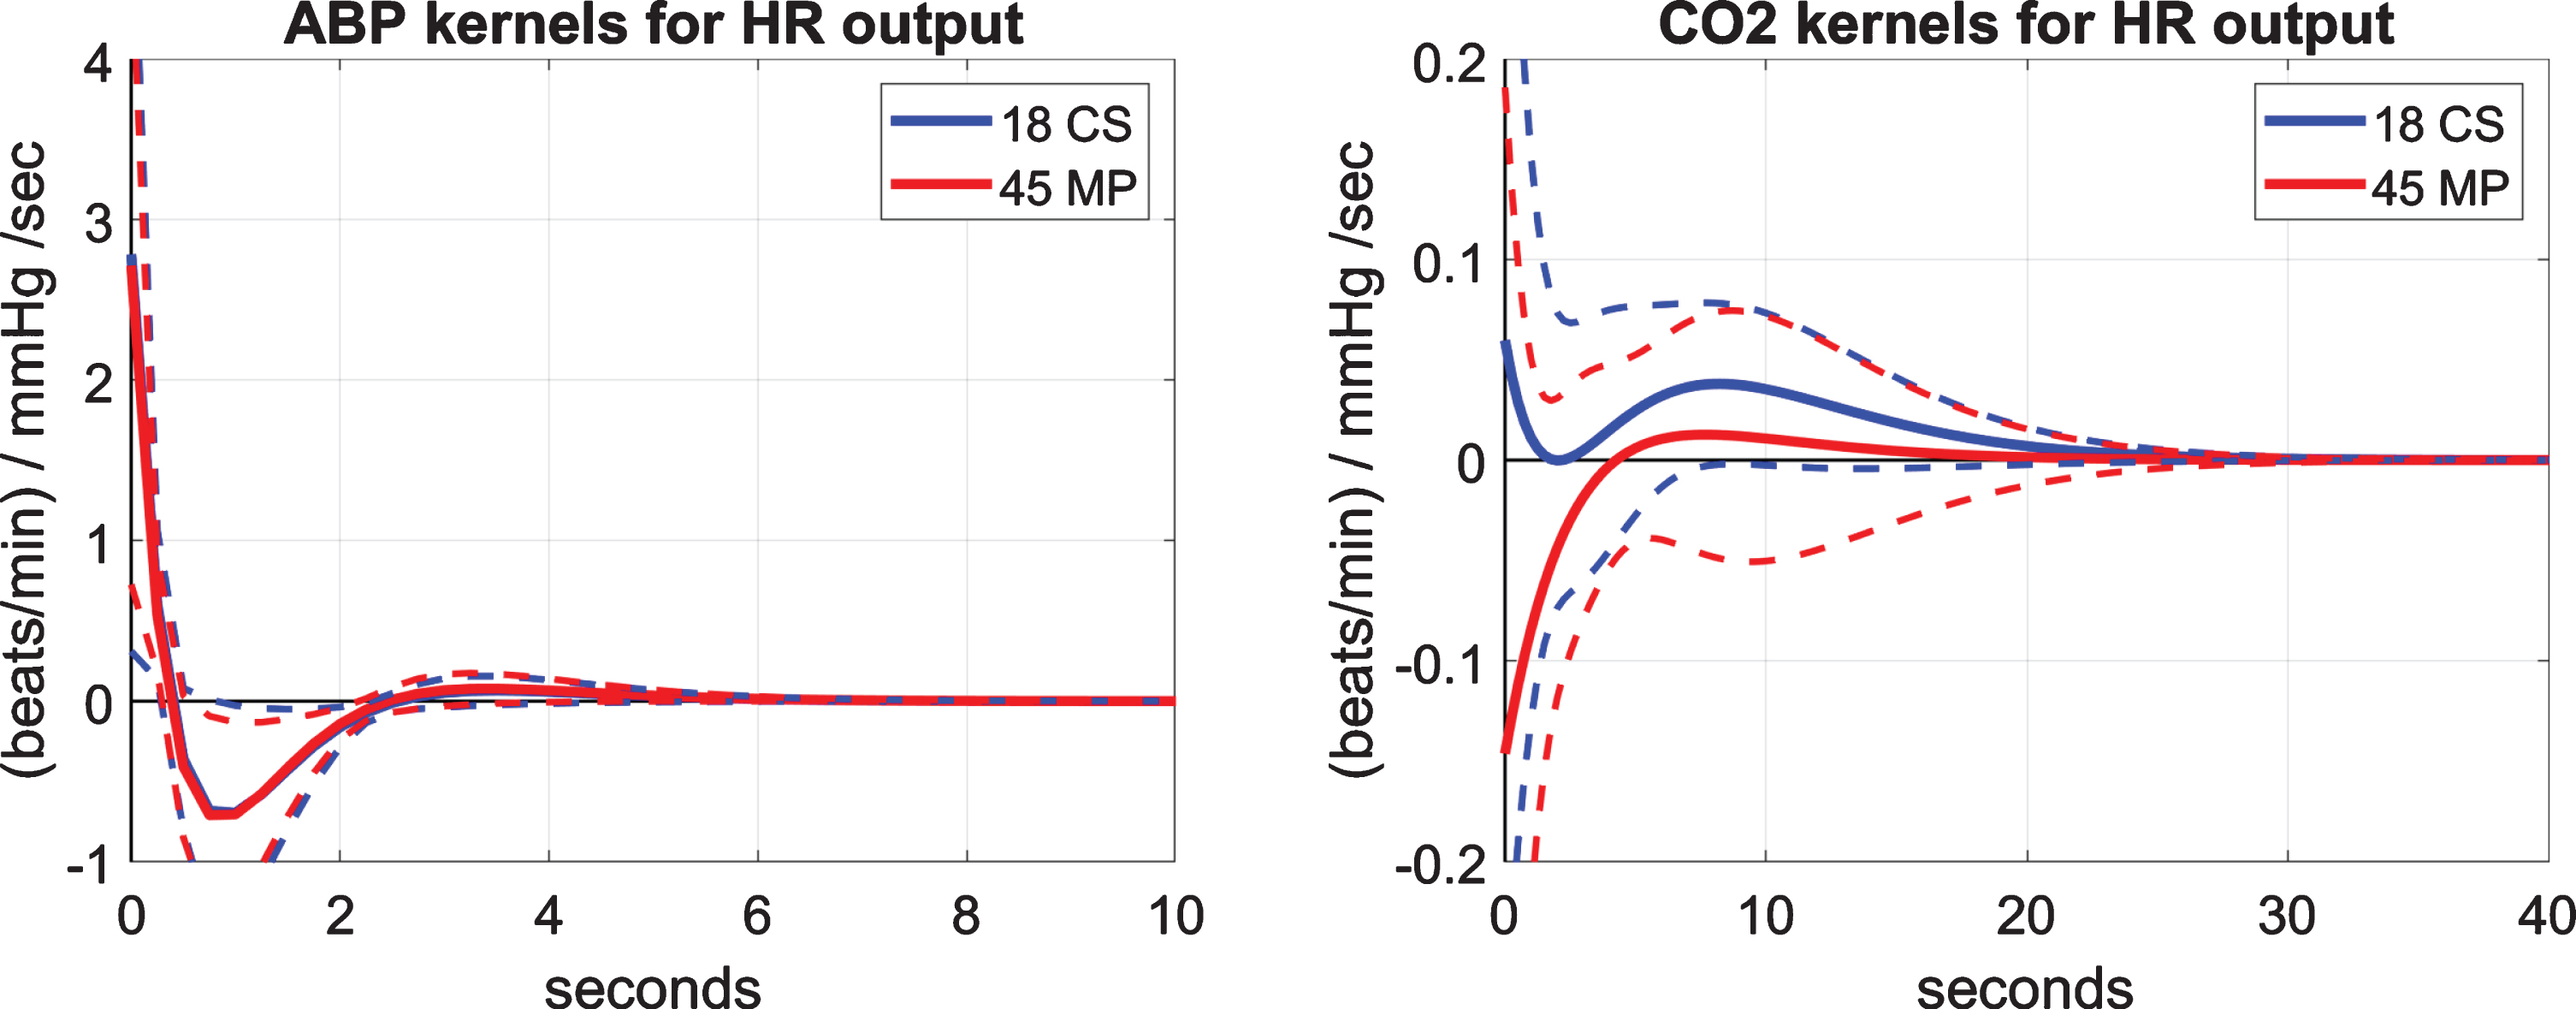 Average kernel estimates (±1 SD bounds marked with dotted lines) over 18 CS (blue line) and 45 MP (red line) of the predictive dynamic model for the HR output and the ABP input (left panel) or the CO2 input (right panel). These two sets of kernels describe the baroreflex and chemoreflex dynamics, respectively. The baroreflex kernels are similar for CS versus MP, but the chemoreflex kernels are distinct.